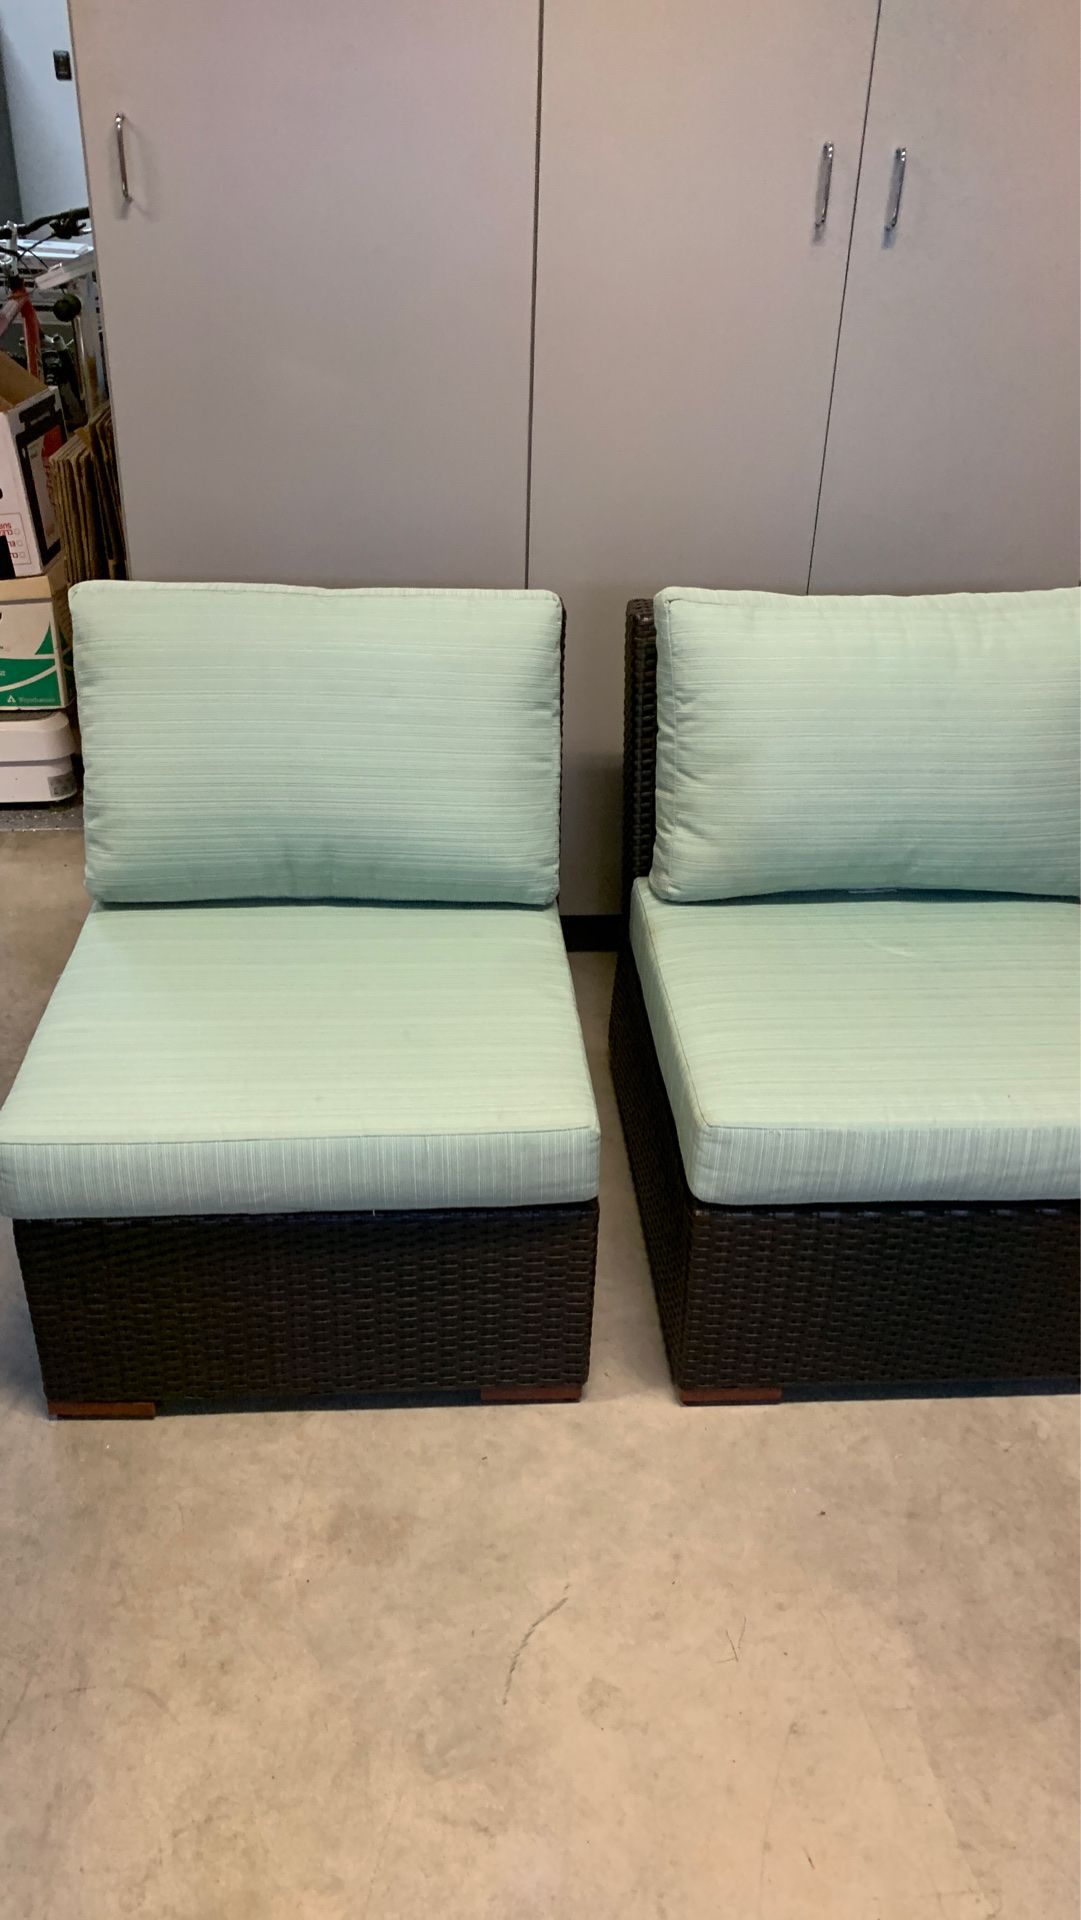 New outdoor chairs with cushions